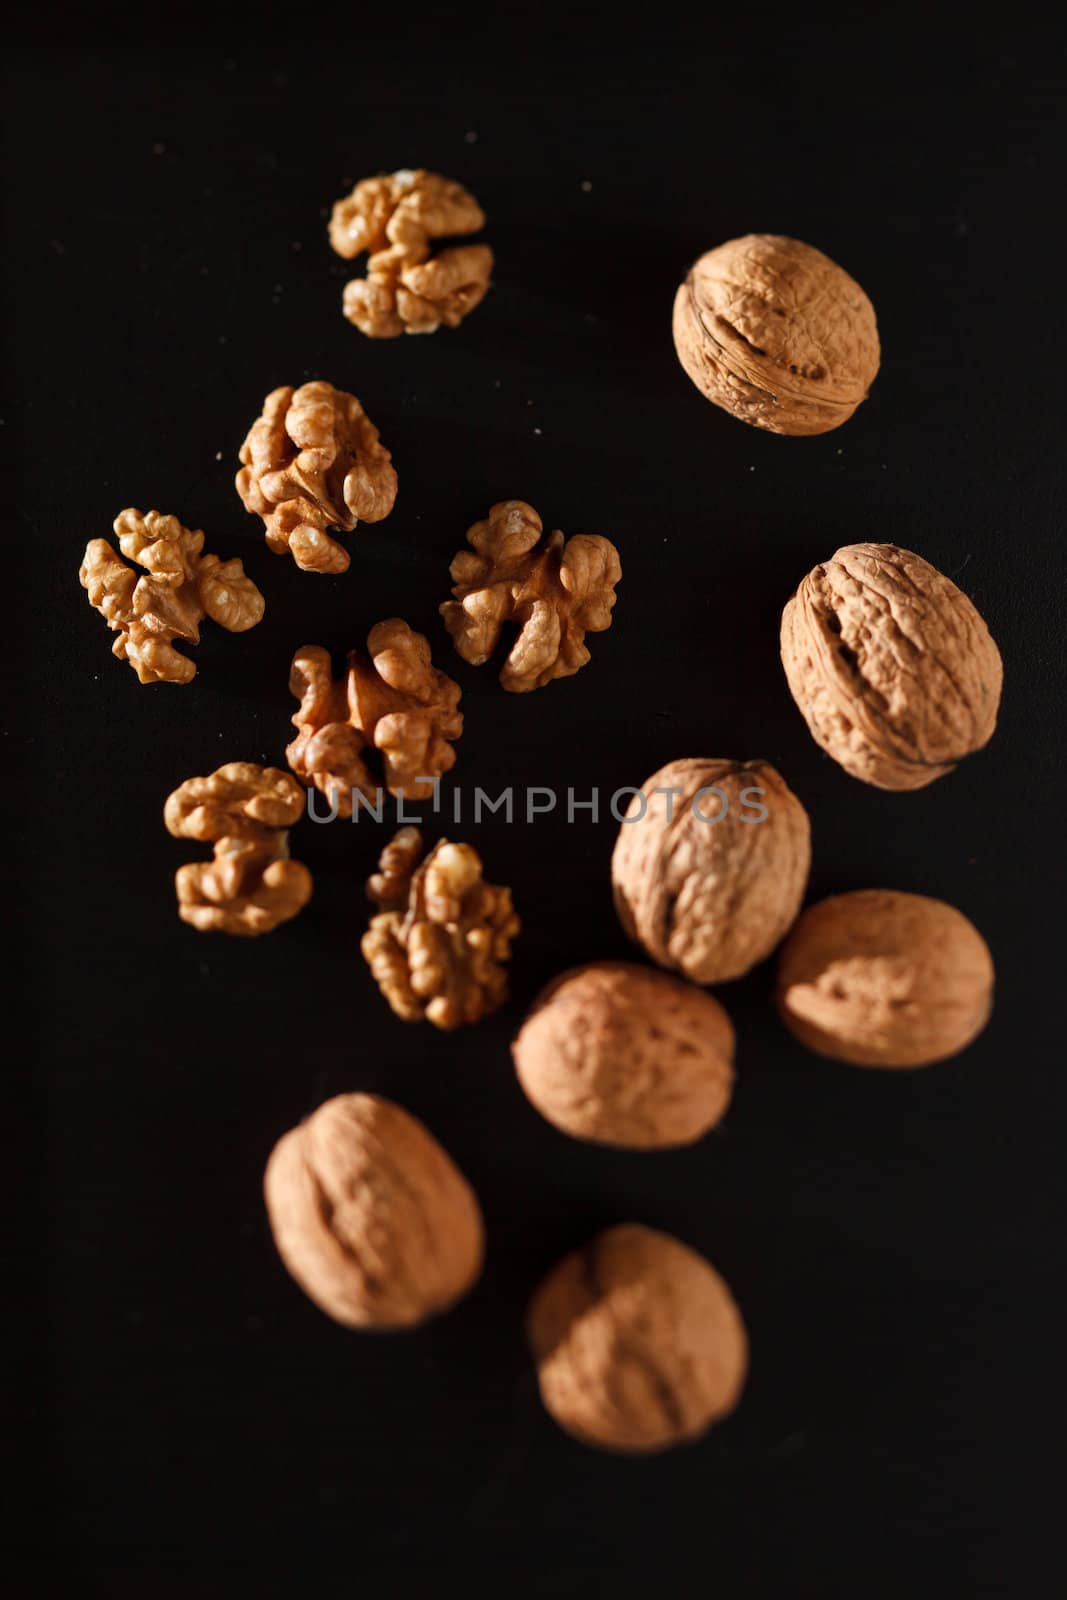 walnuts on black background by shebeko